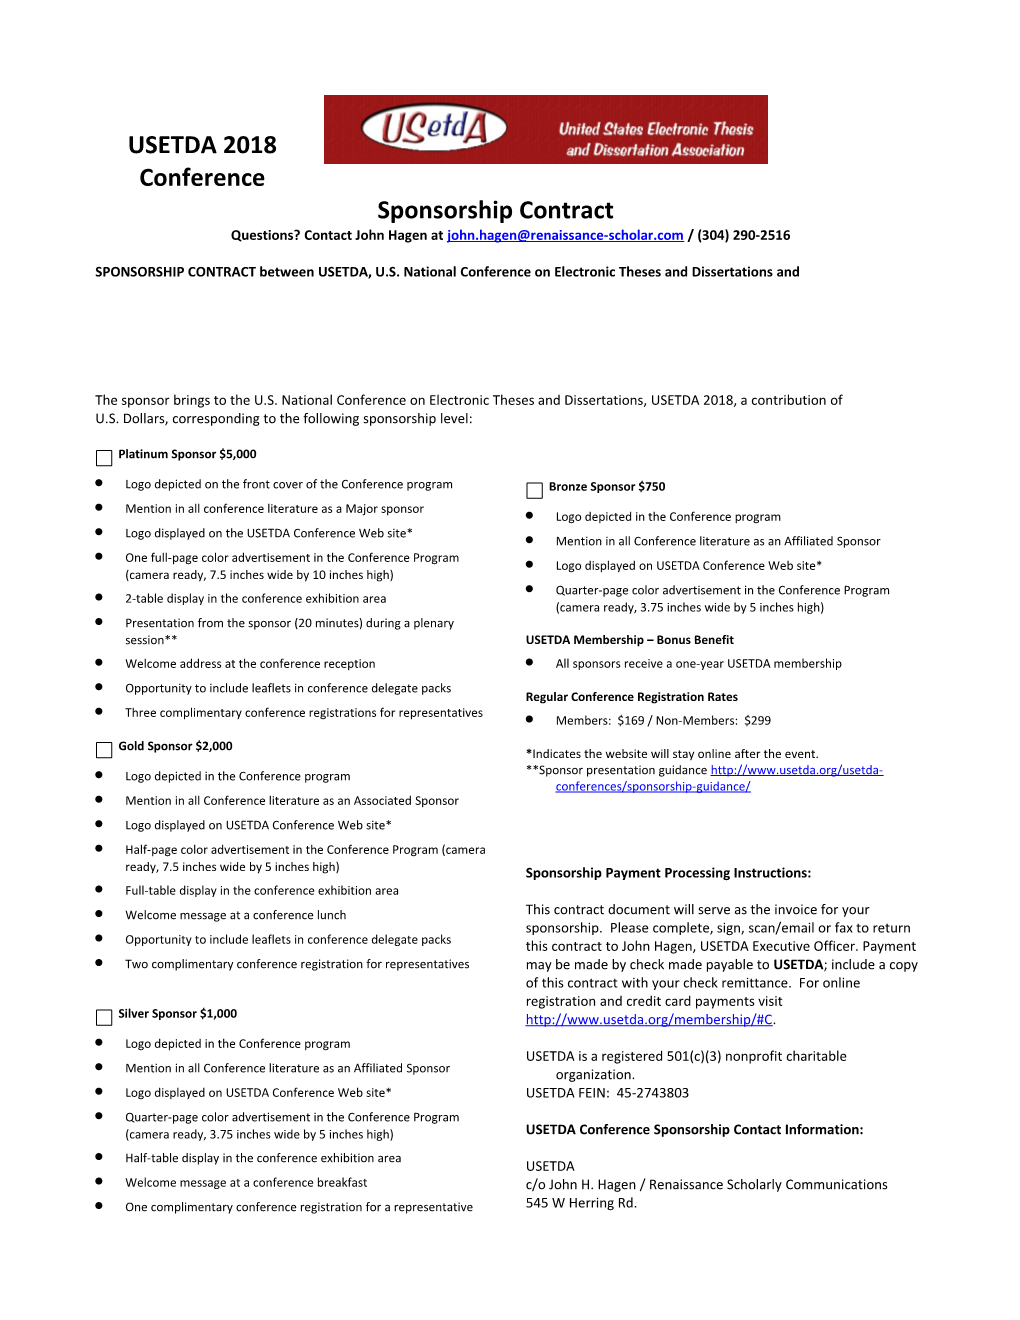 USETDA 2018Conference Sponsorship Opportunities